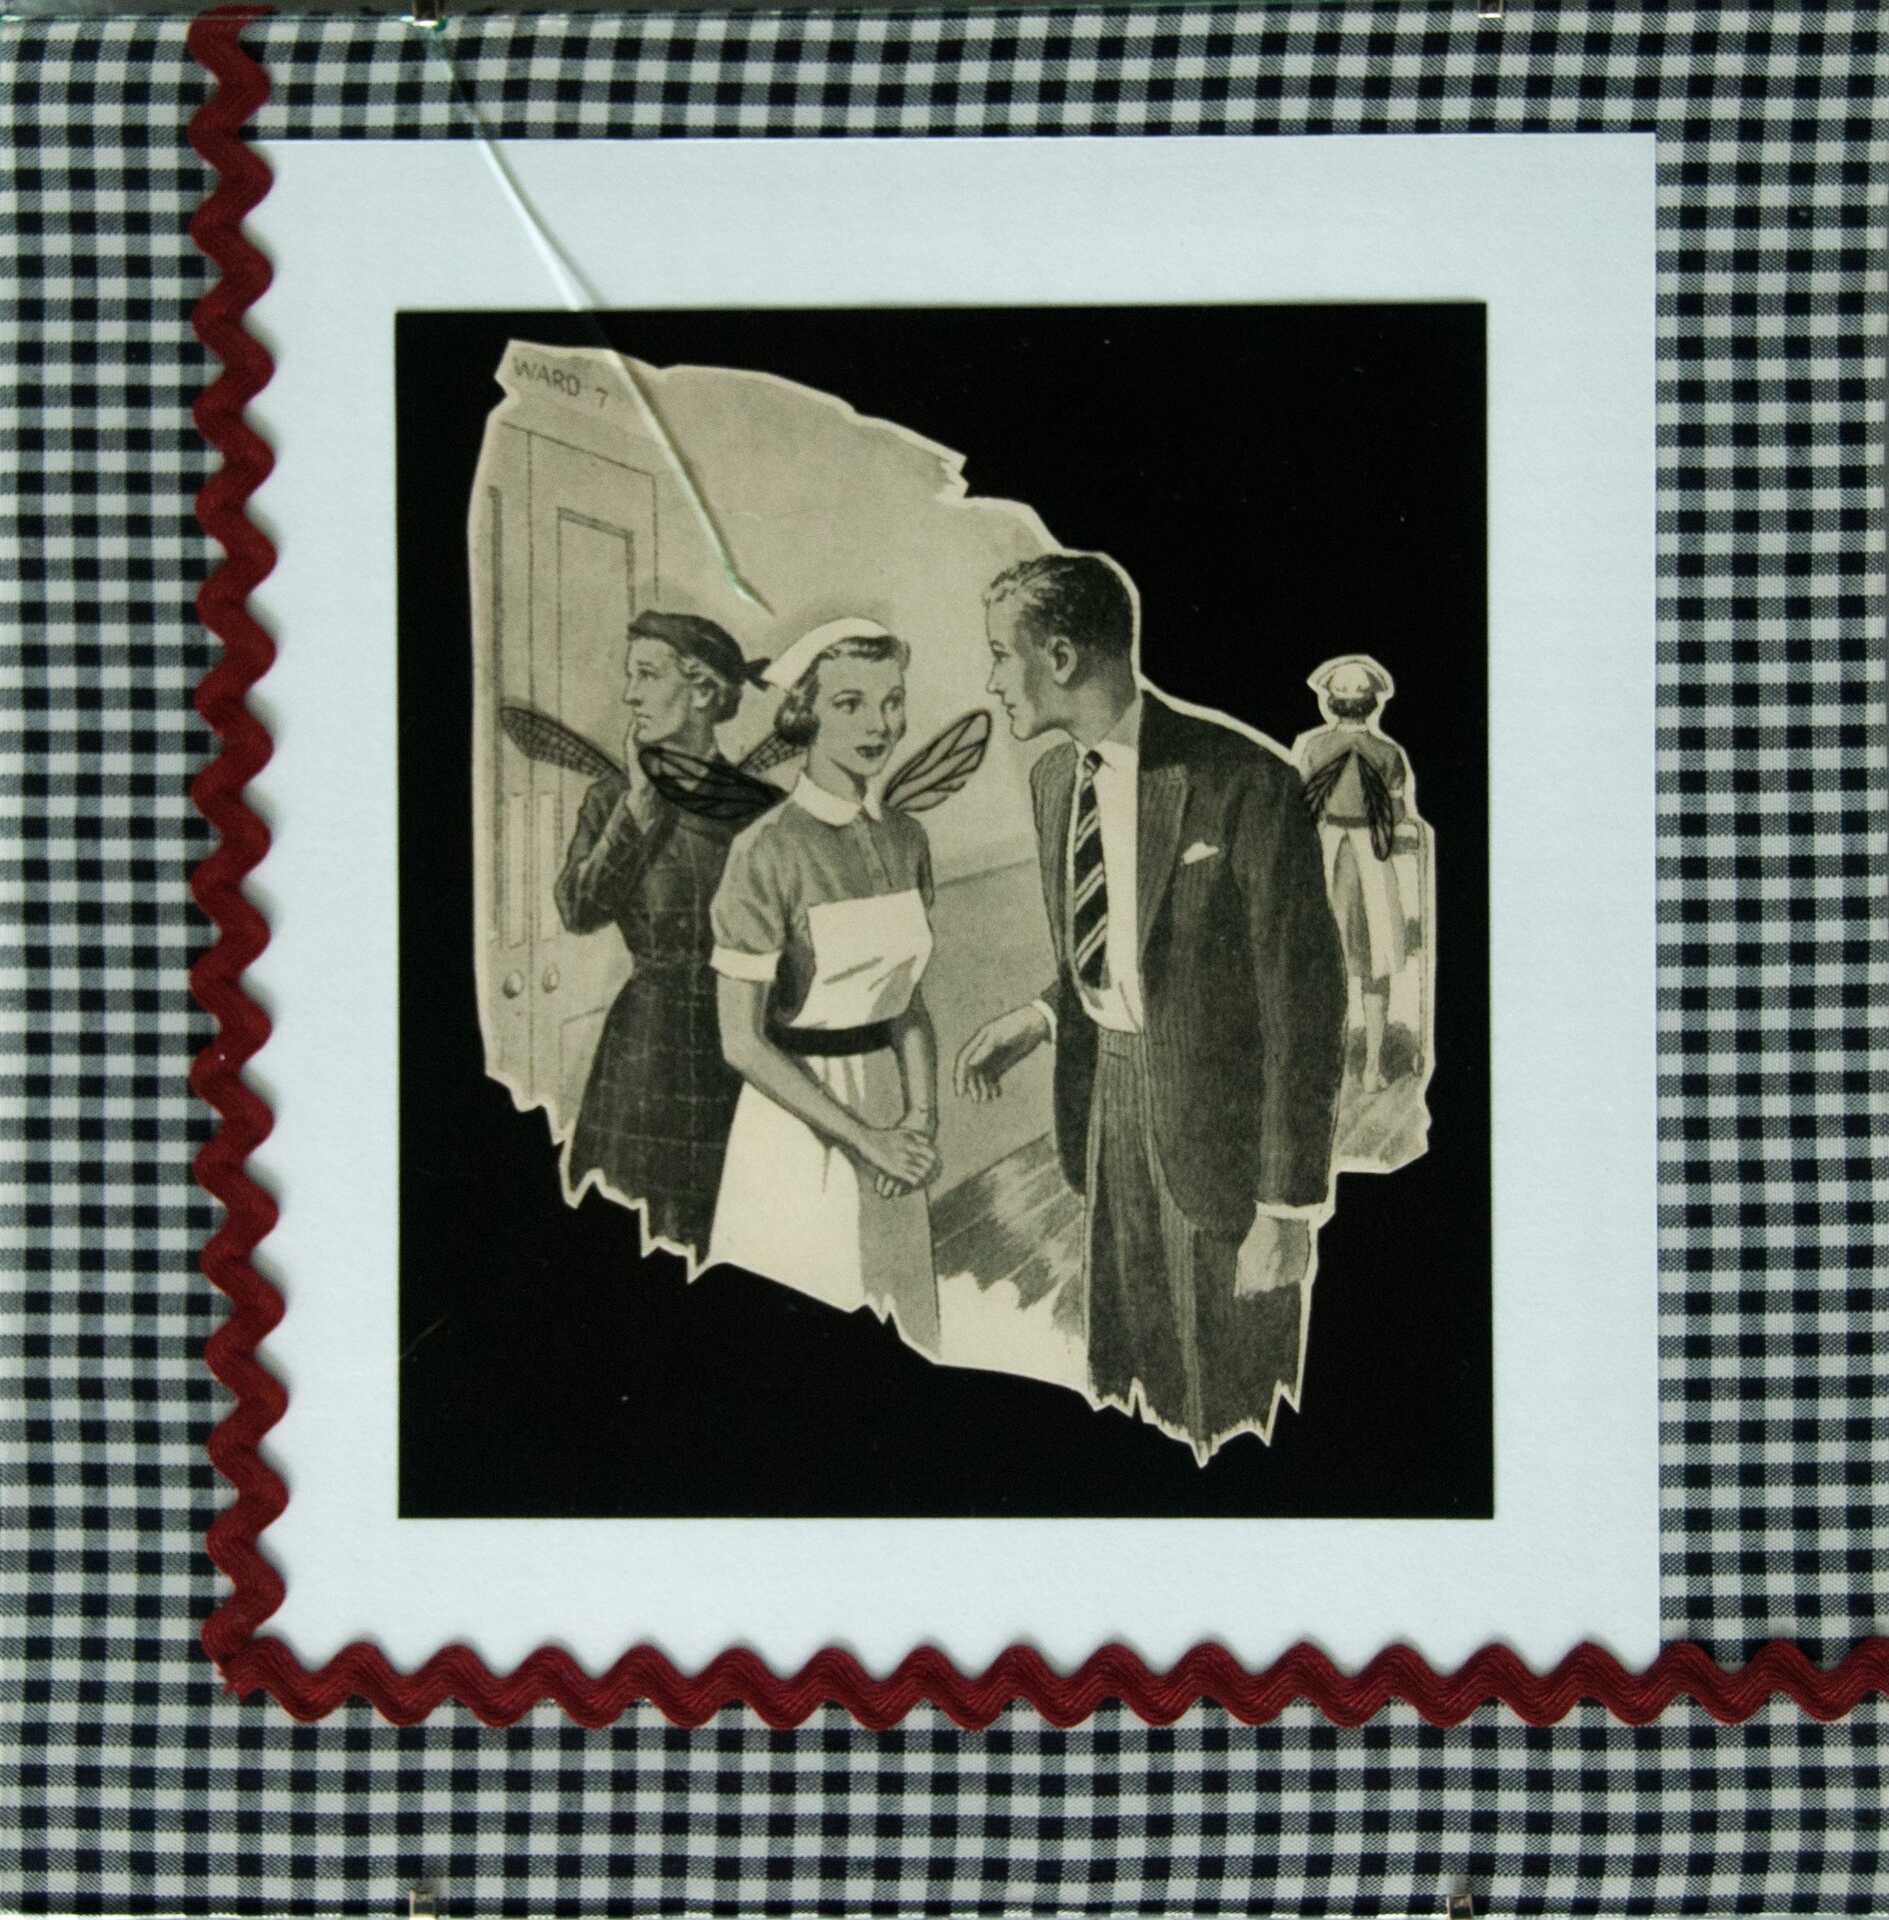 "Just Do Your Job" by Libby Bloxham. A vintage book illustration is layered over black and white gingham fabric with red braid to create a square collage. The illustration shows a man in a suit speaking to a female nurse in a demure pose, while a well-dressed woman looks away seeming concerned. Acetate insect wings have been added to the women in the picture.